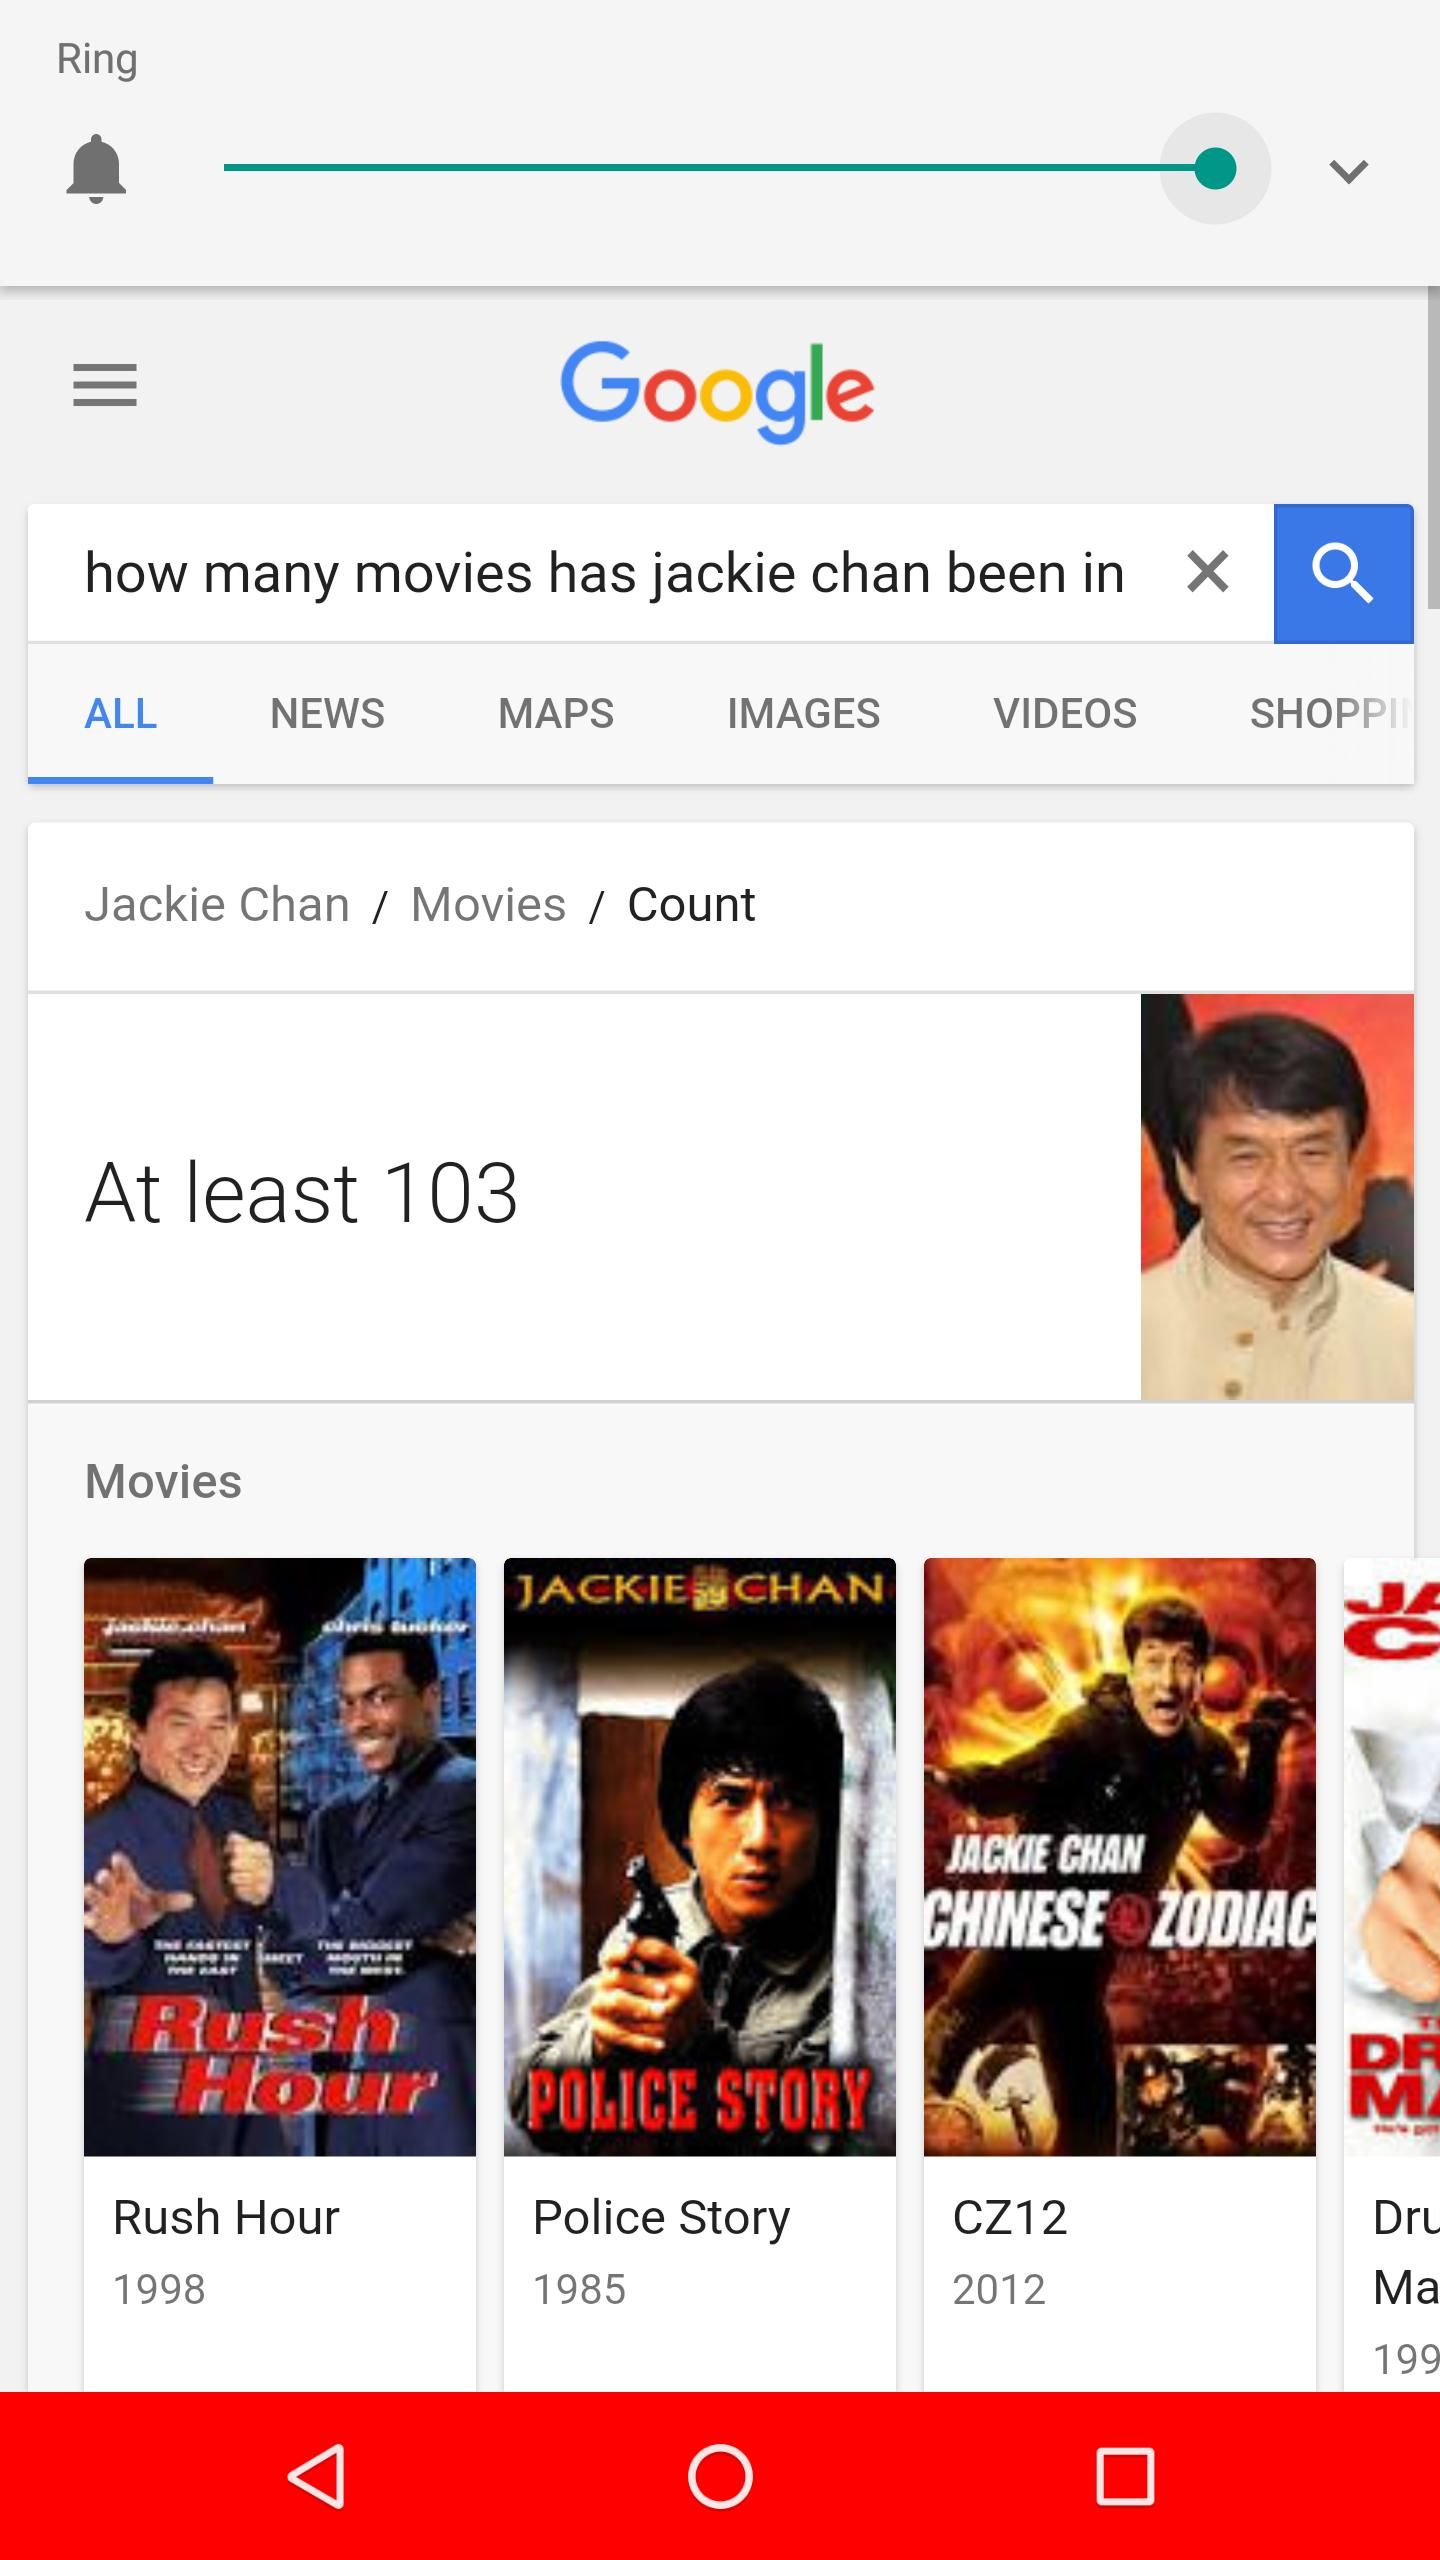 Google isn't sure how many movies Jackie Chan has been in